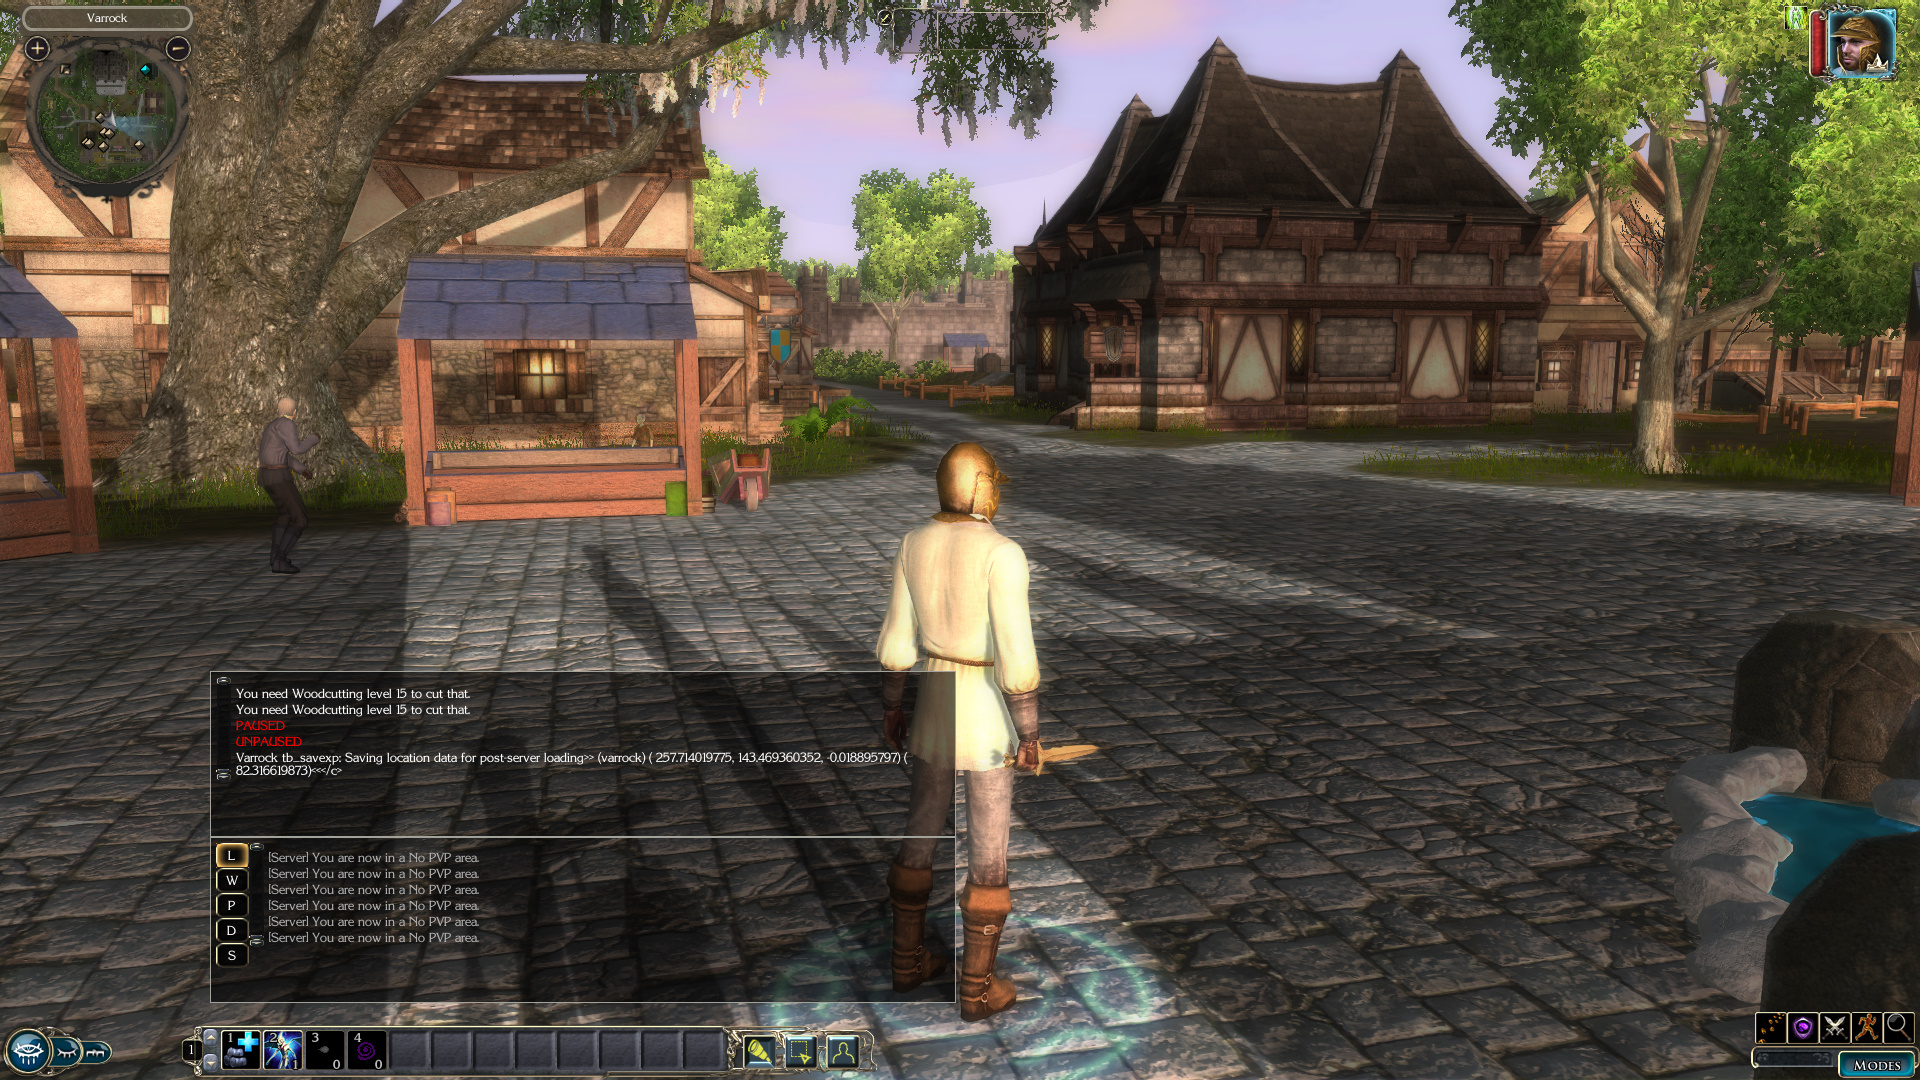 Neverwinter Nights 2 gameplay of a man standing in an urban setting.